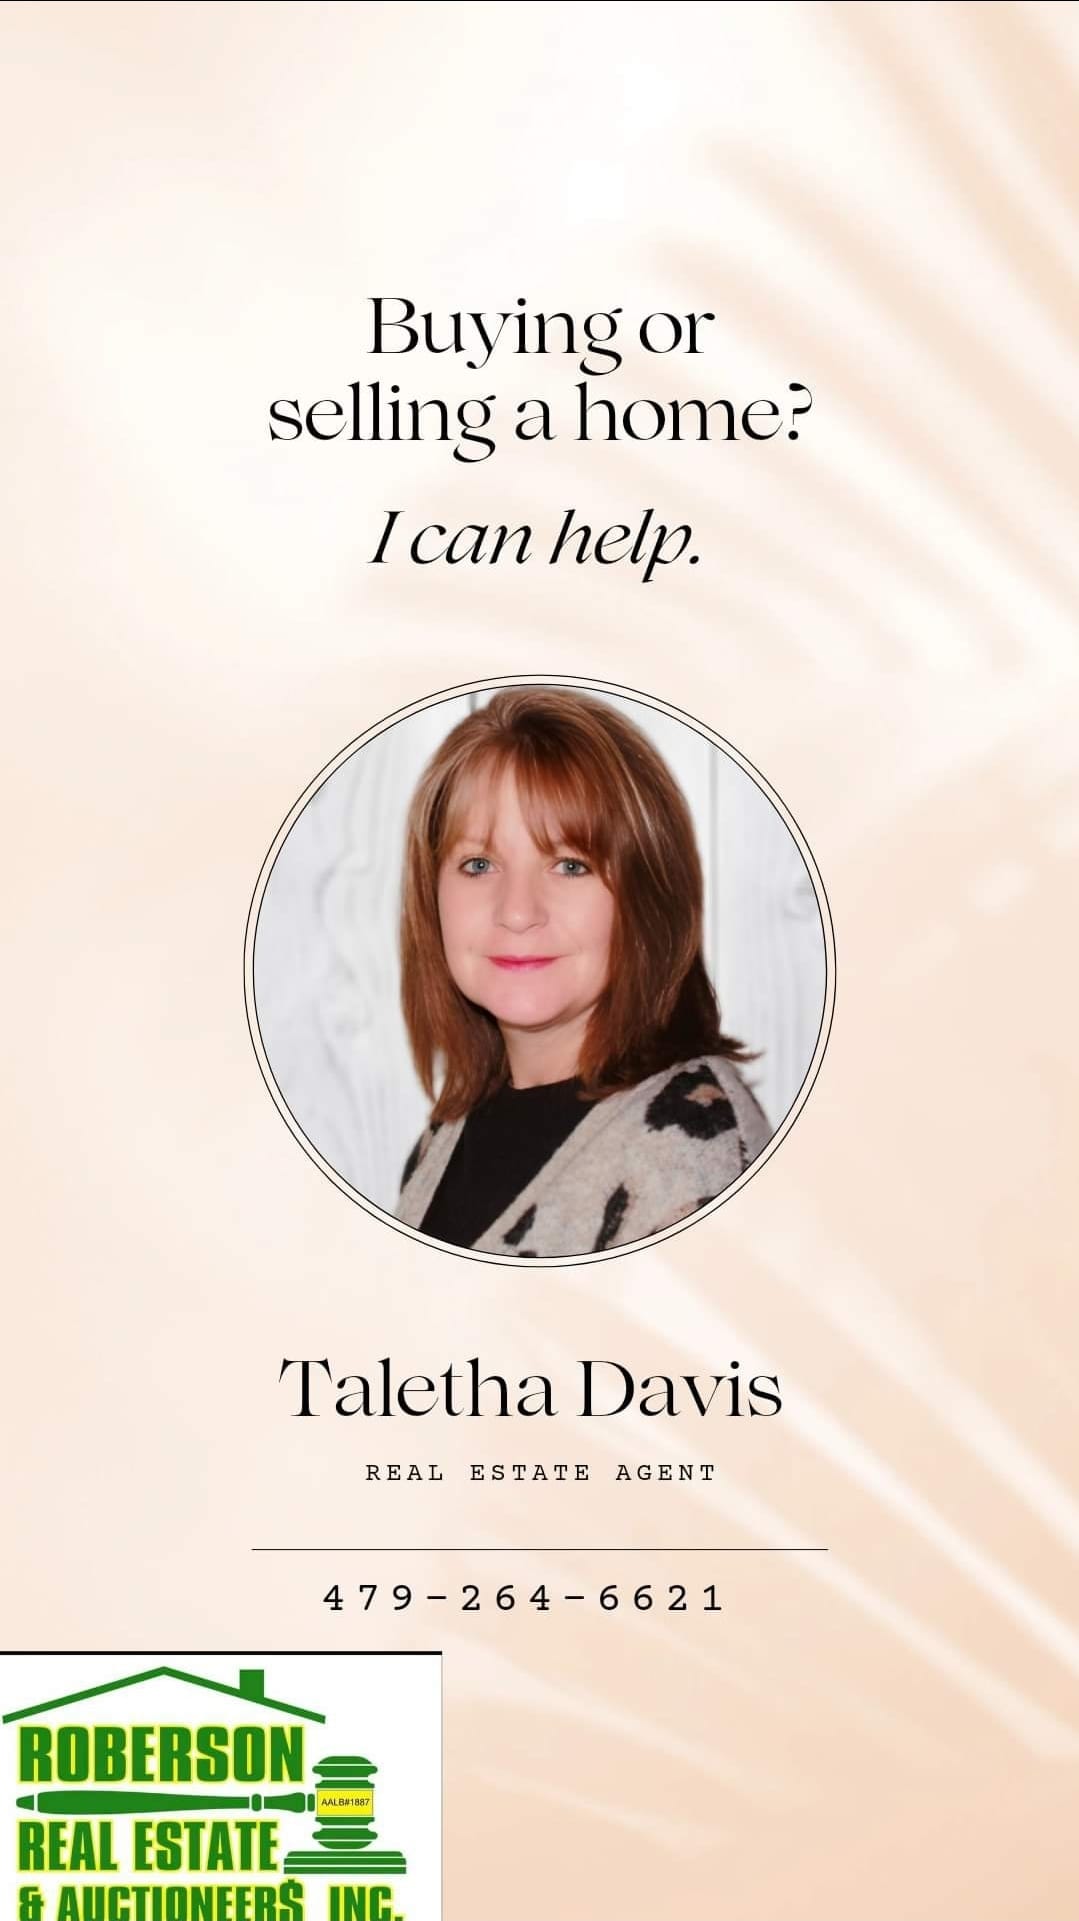 Taletha Davis of Roberson Real Estate and Auctioneers Inc.